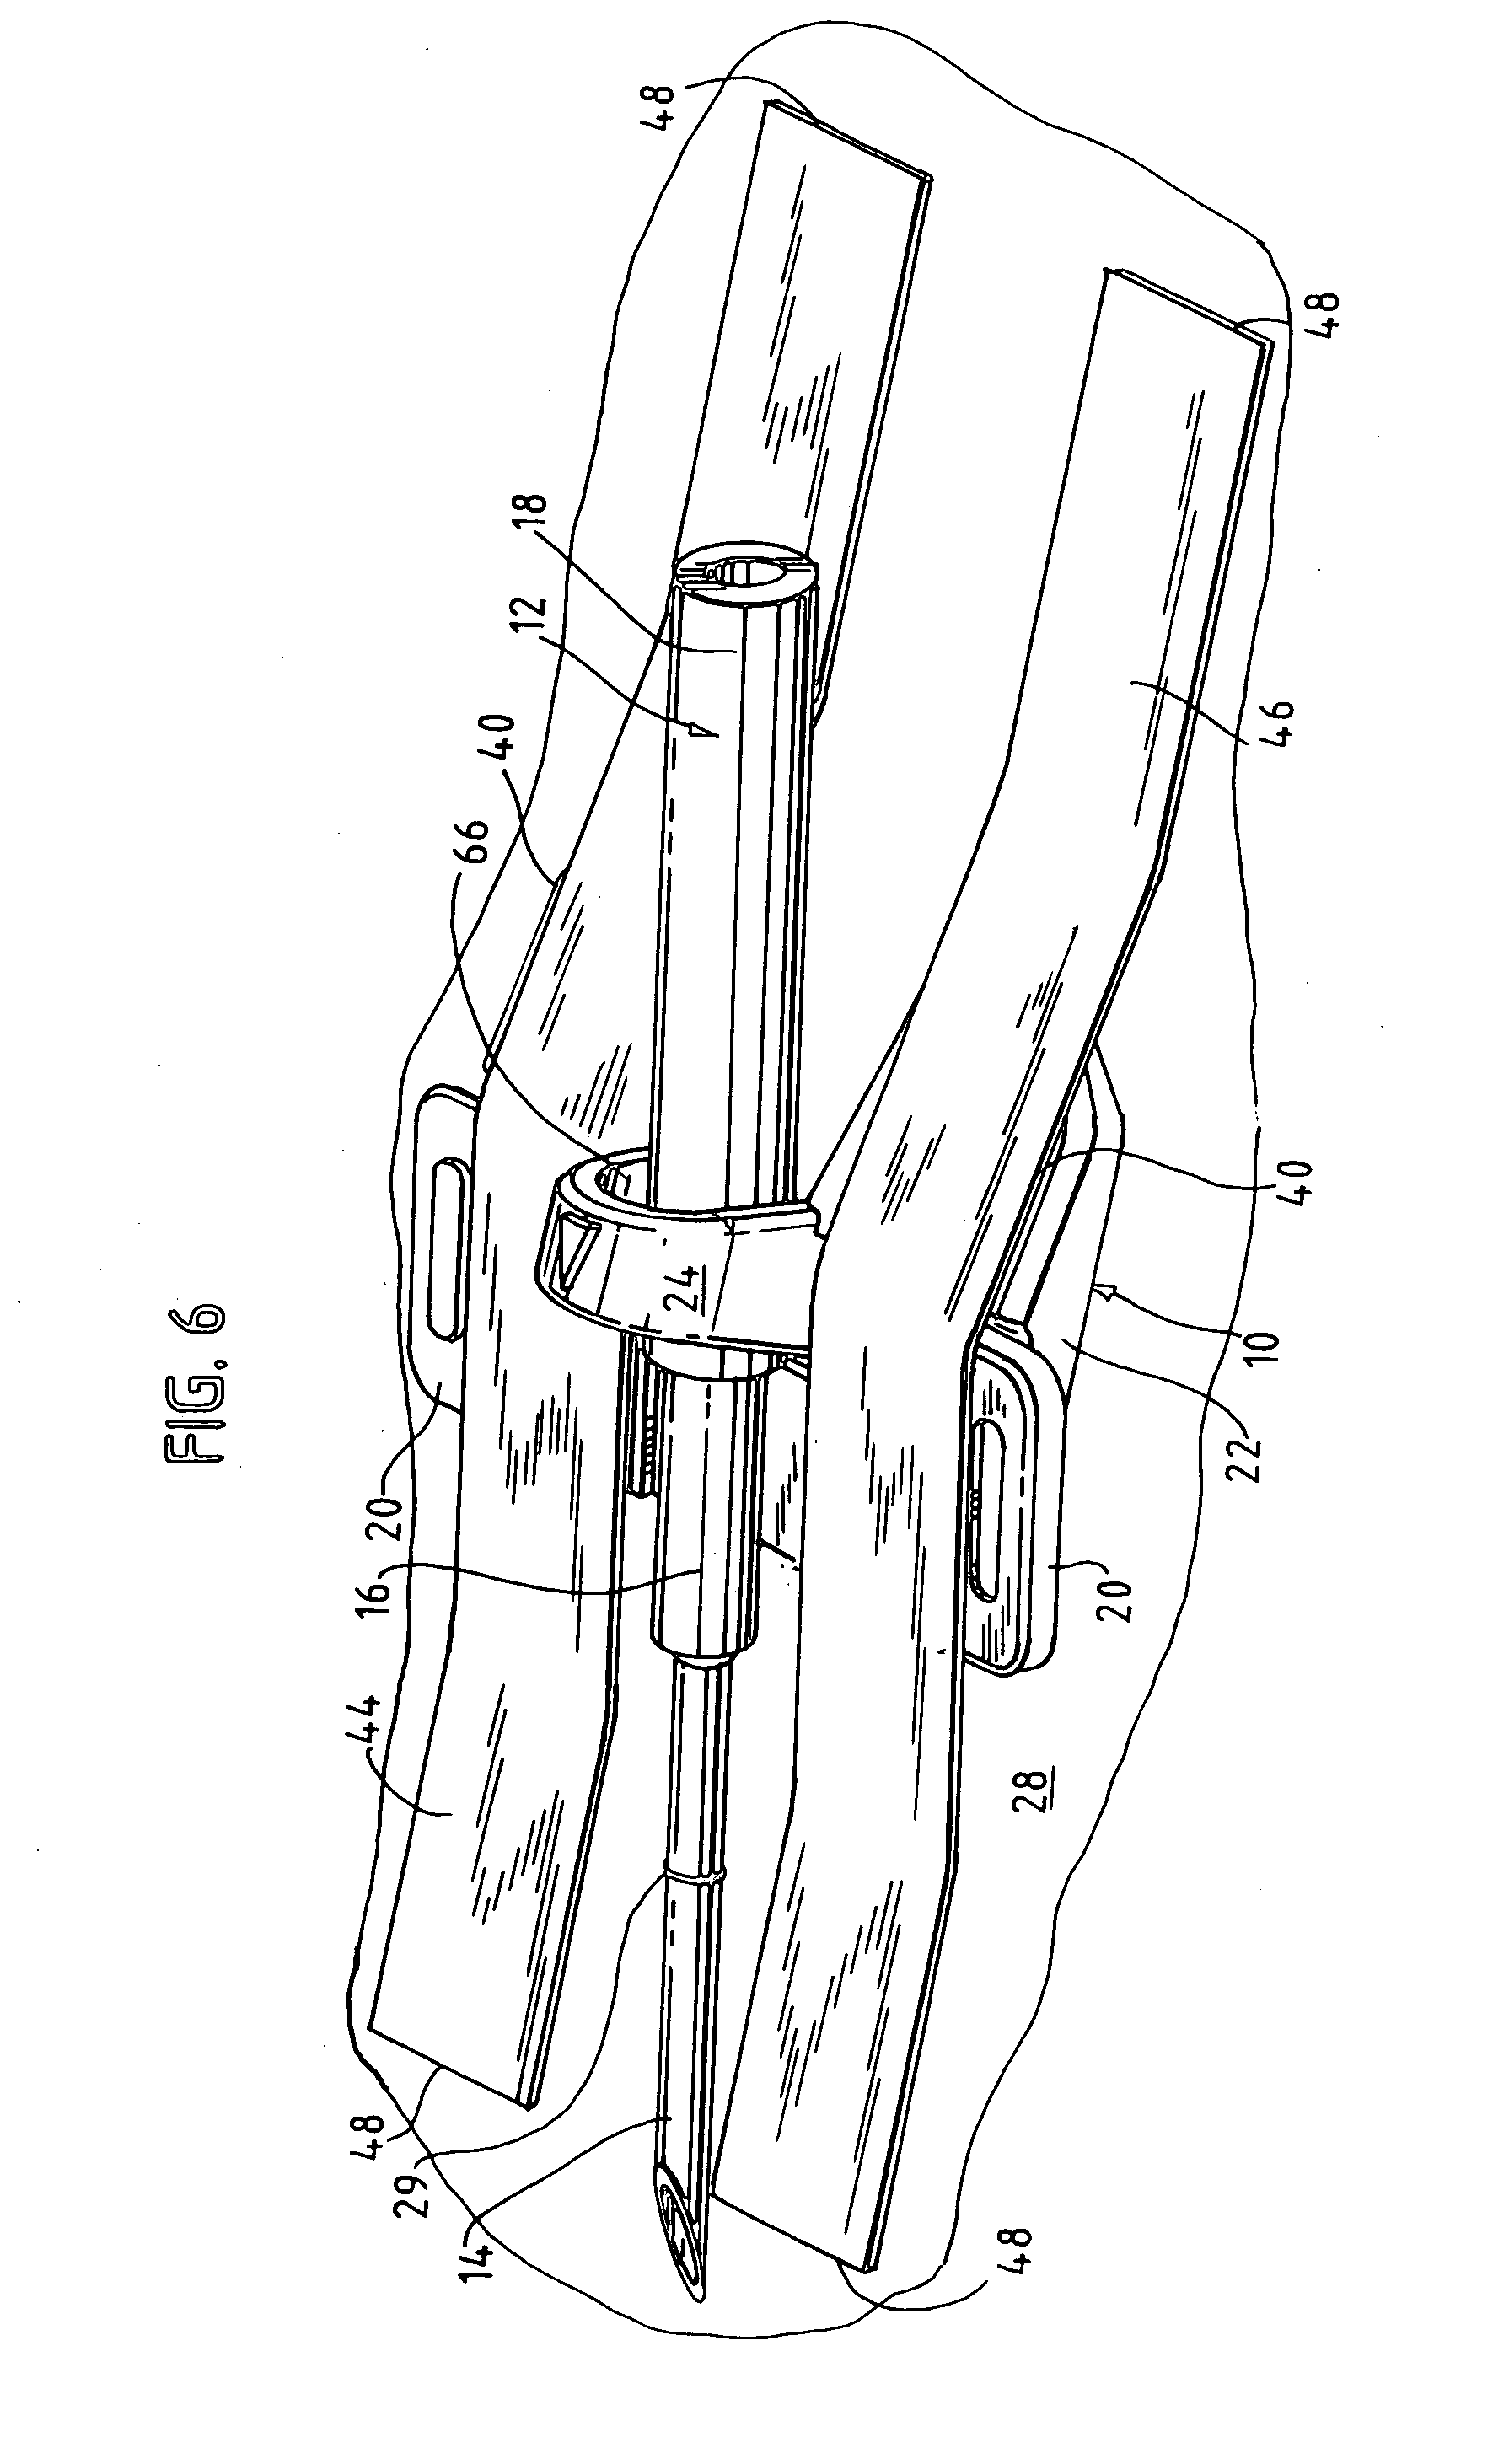 Needle alignment, needle securement and vessel stabilization device